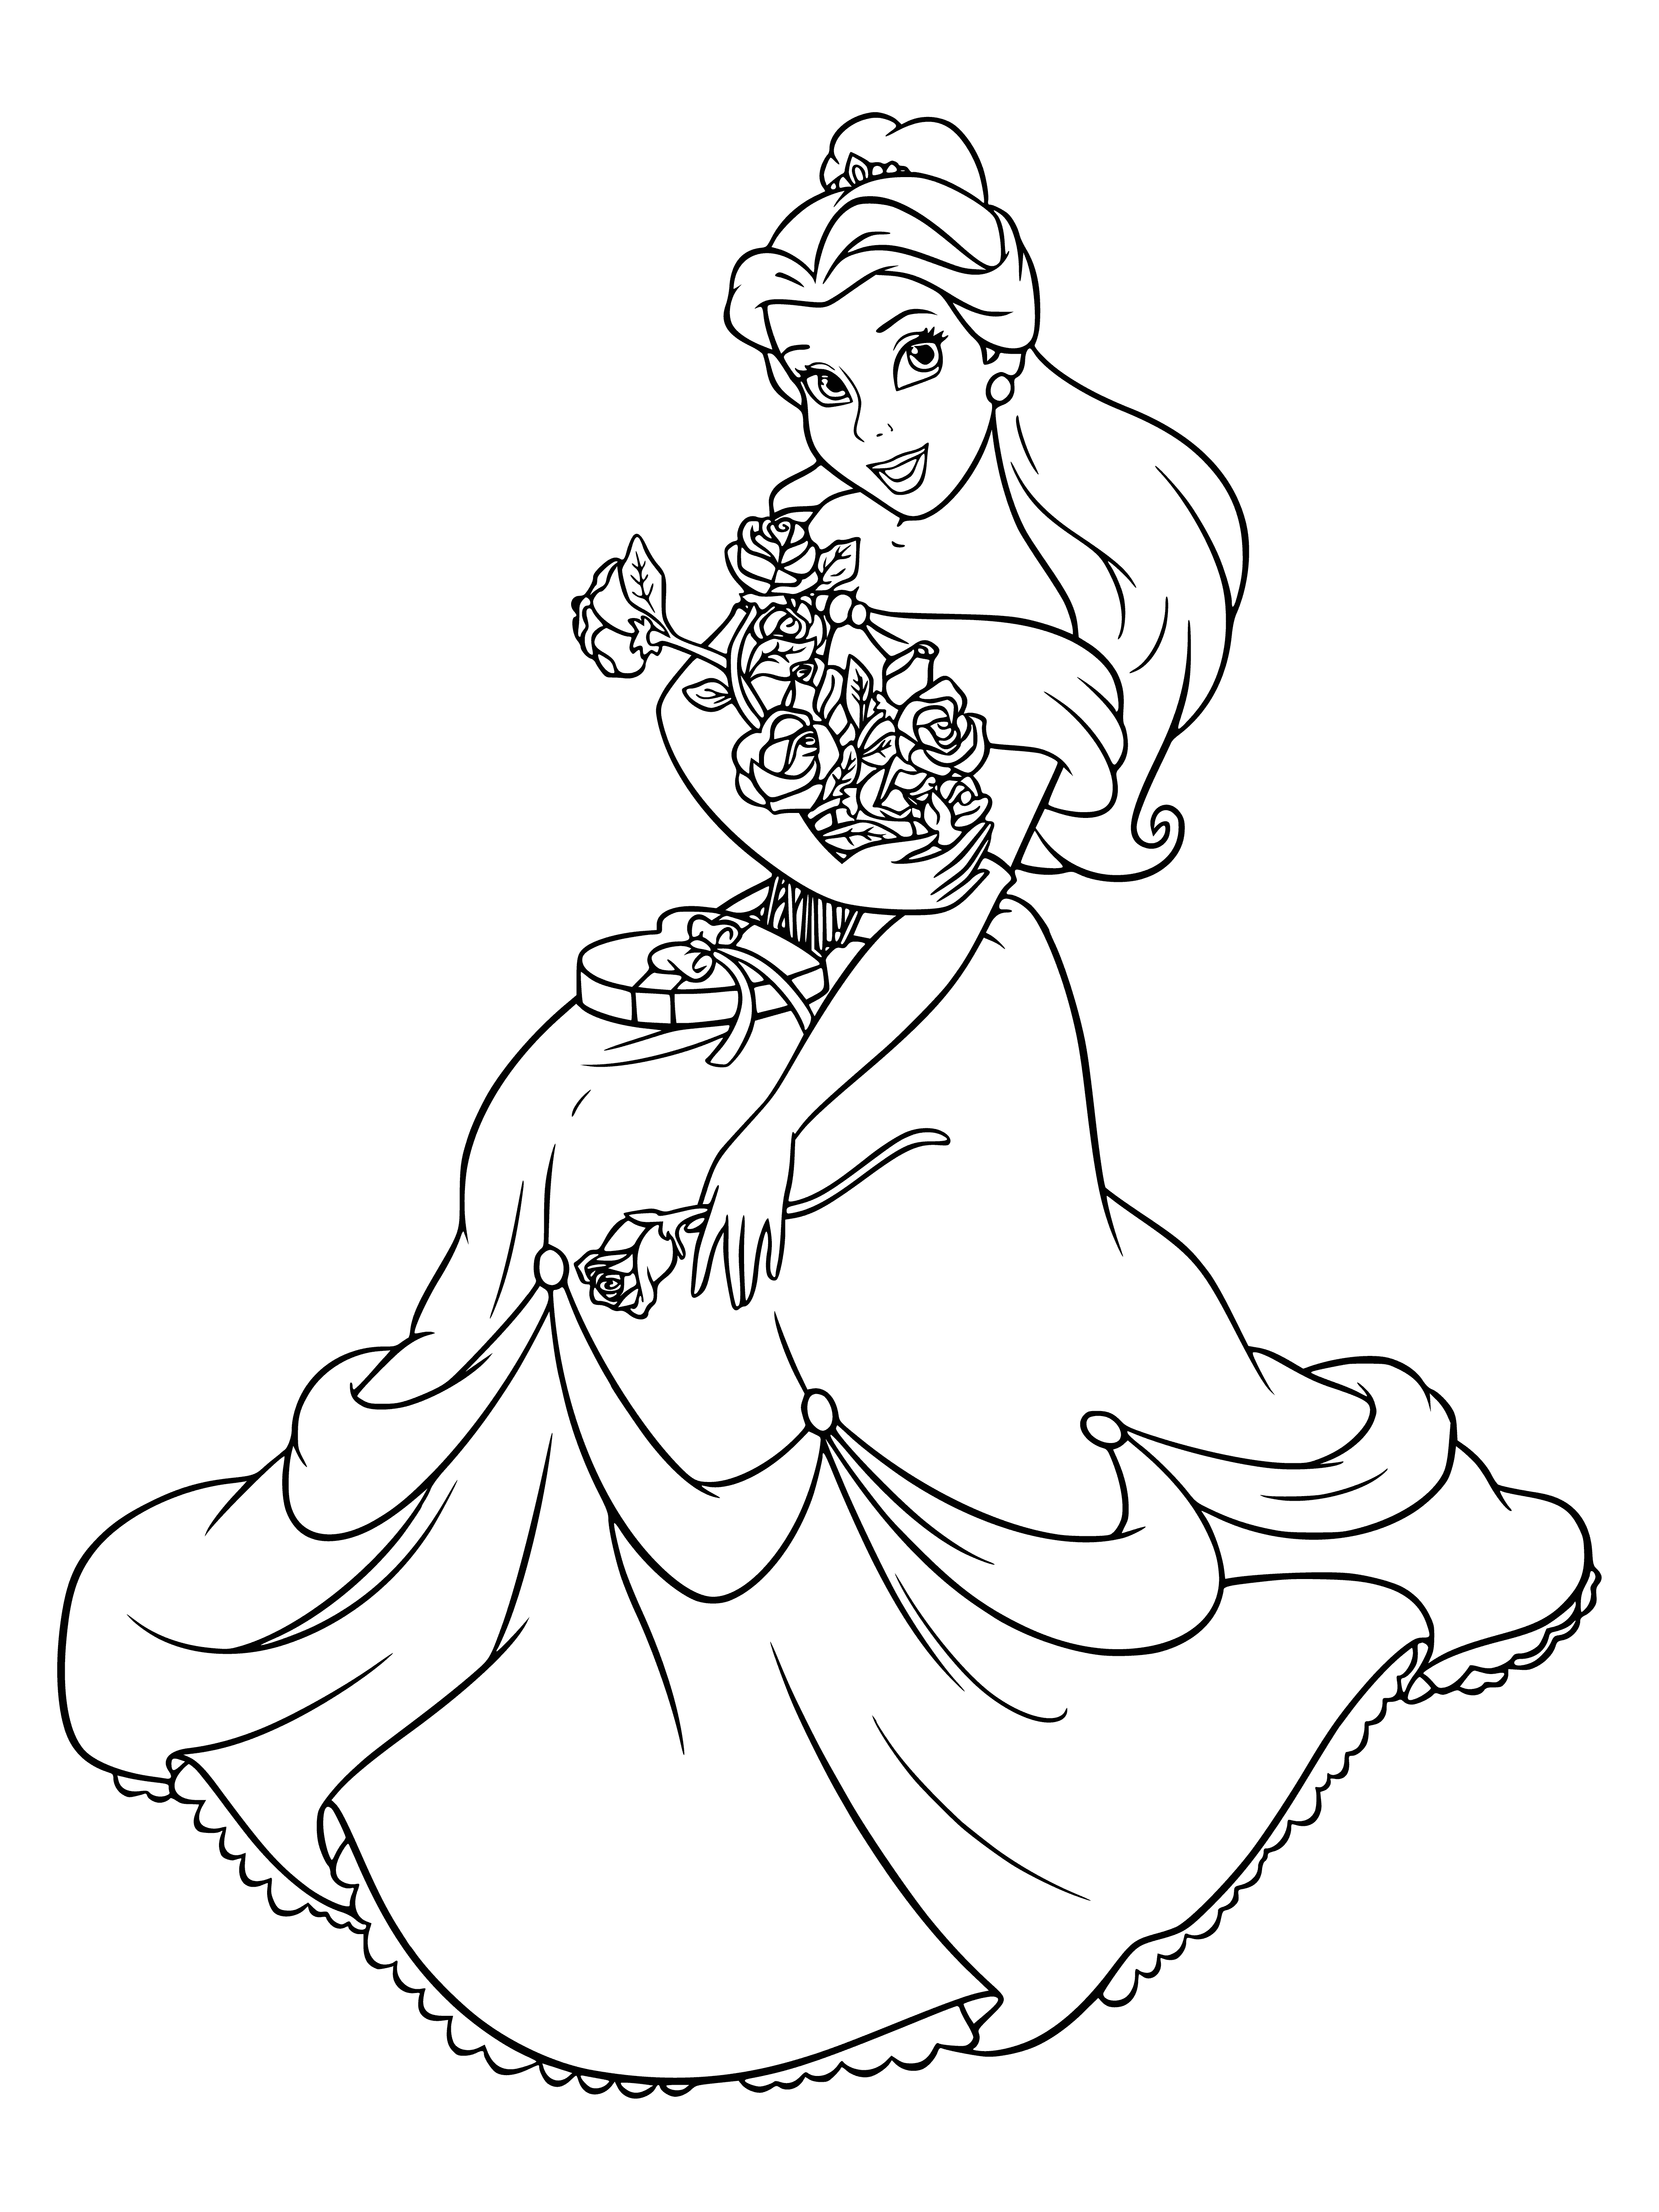 coloring page: Belle stands before Cinderella's castle, flowers in hand. Trees and shrubs in the foreground.